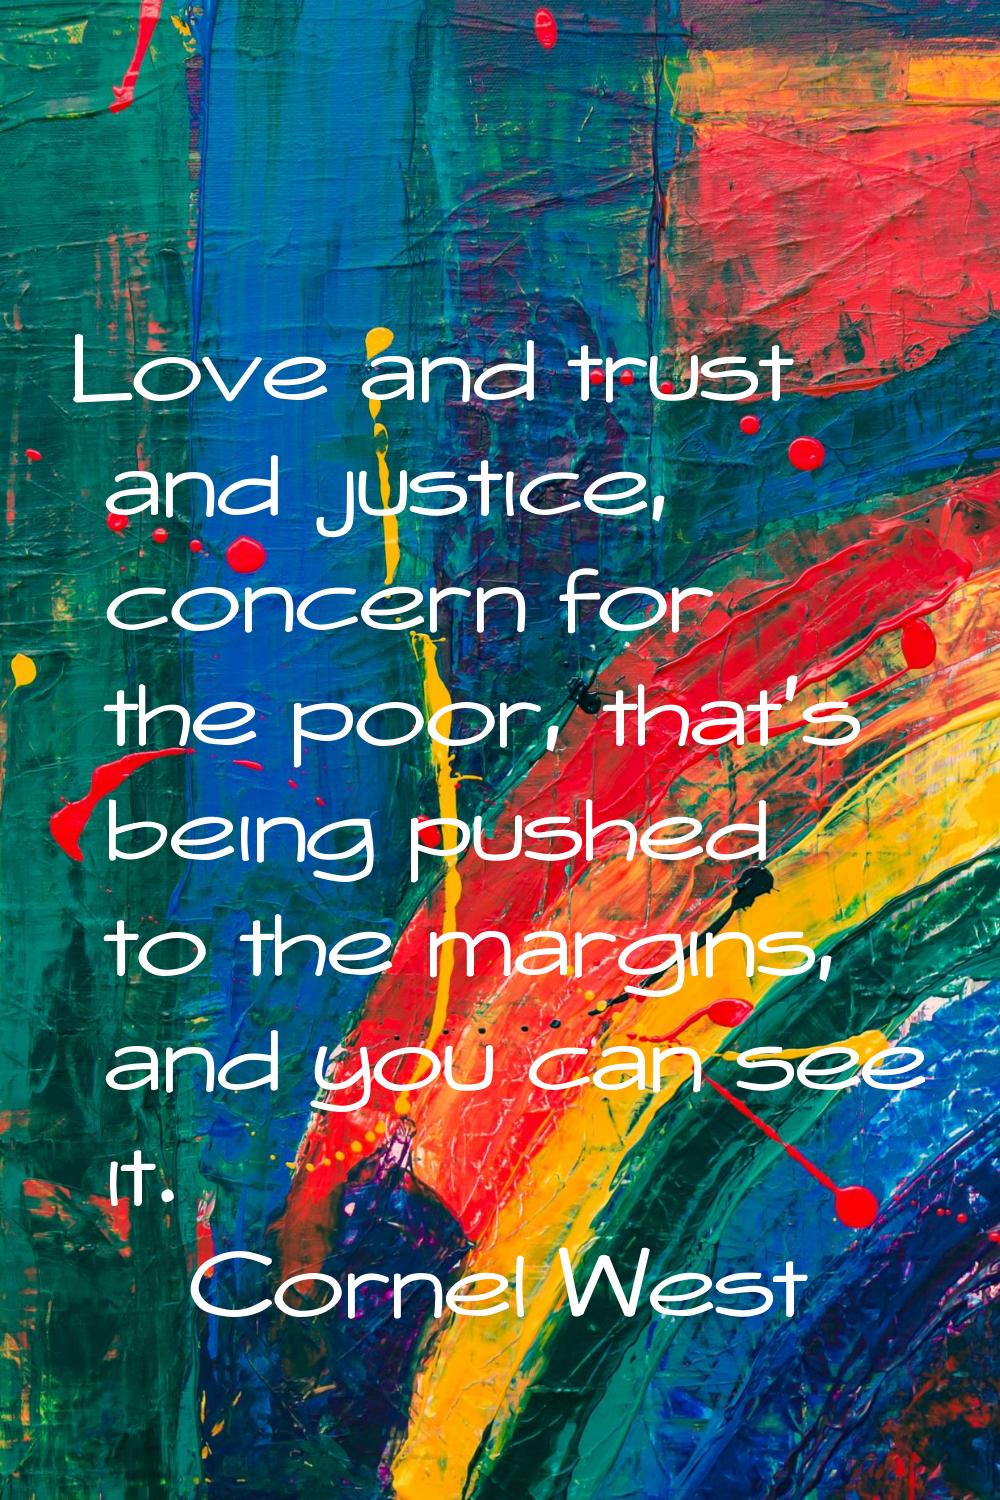 Love and trust and justice, concern for the poor, that's being pushed to the margins, and you can s